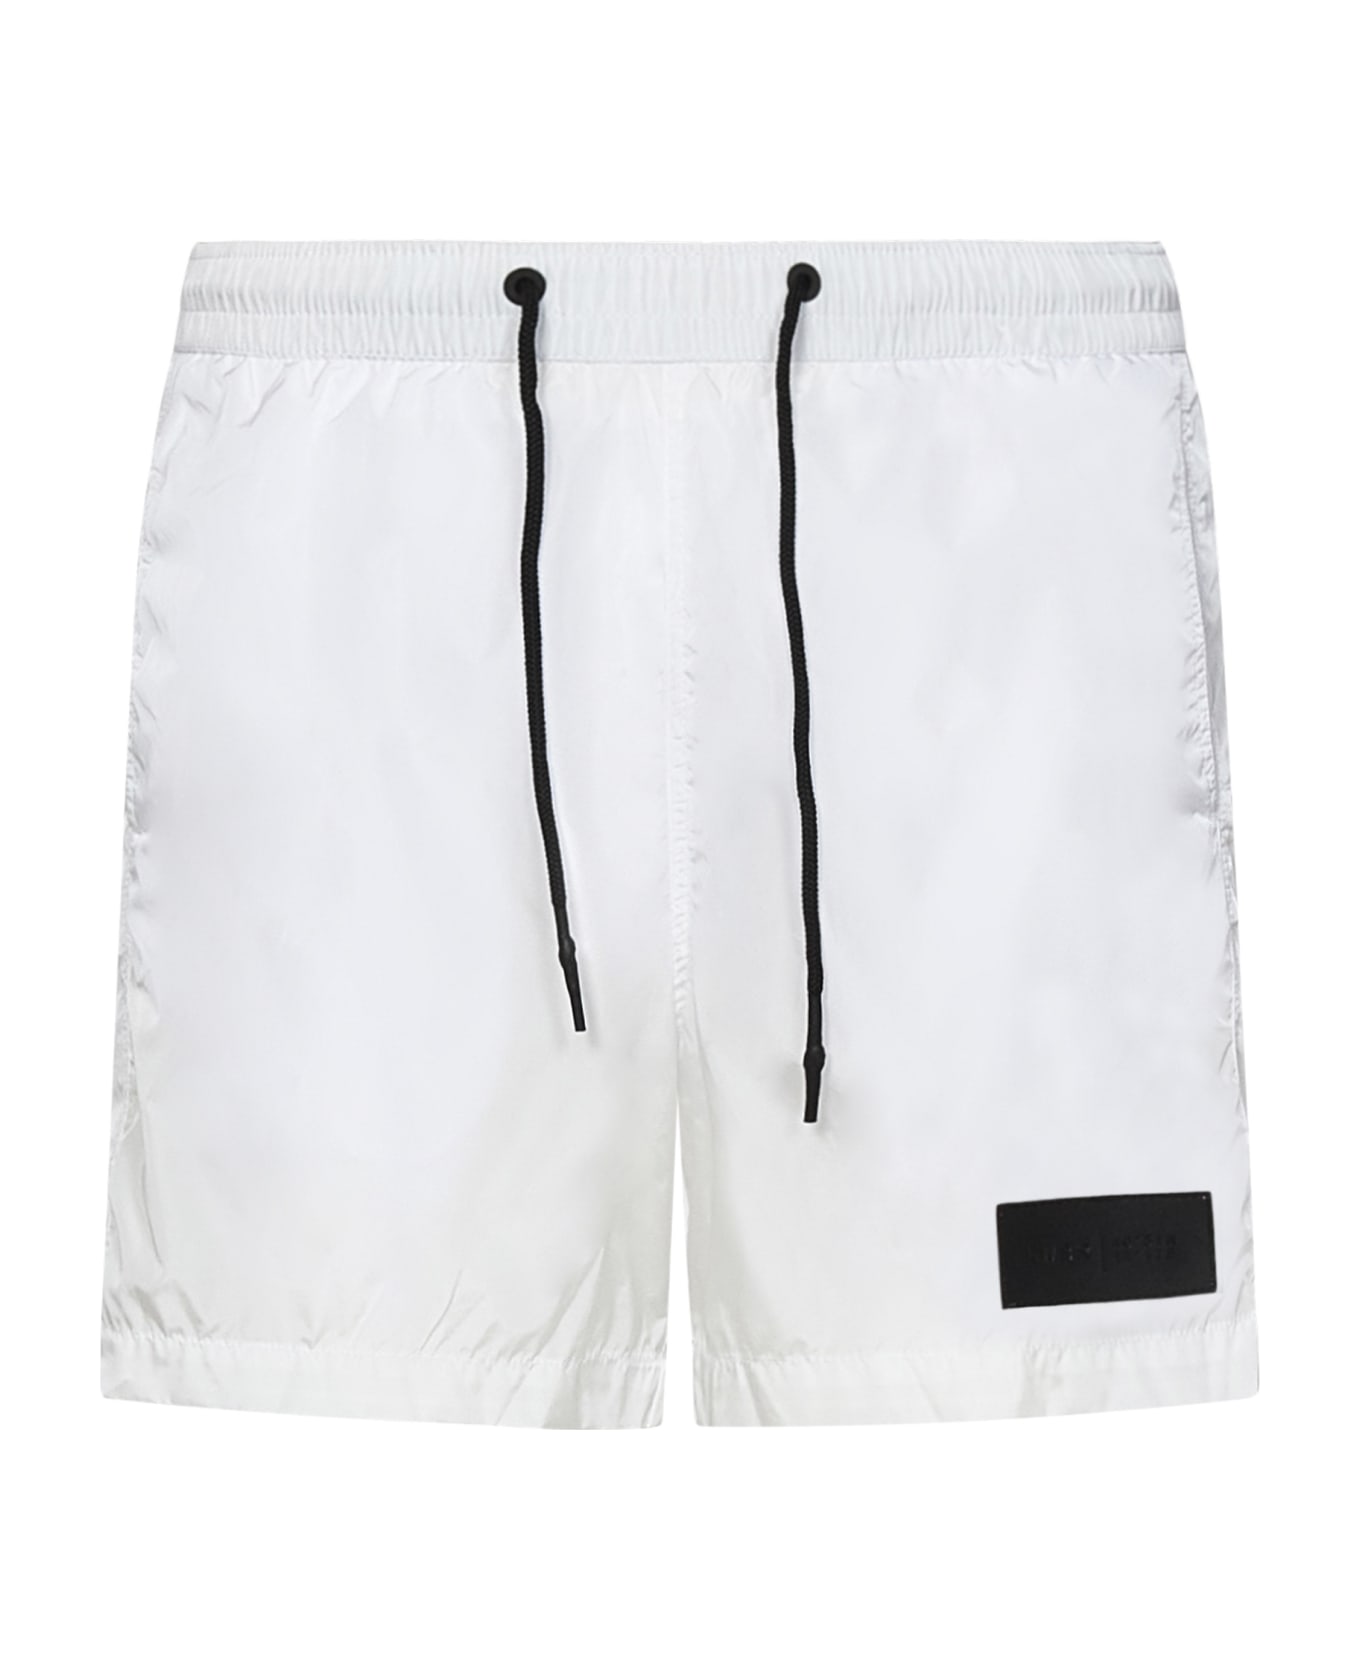 Low Brand Swimsuit - White